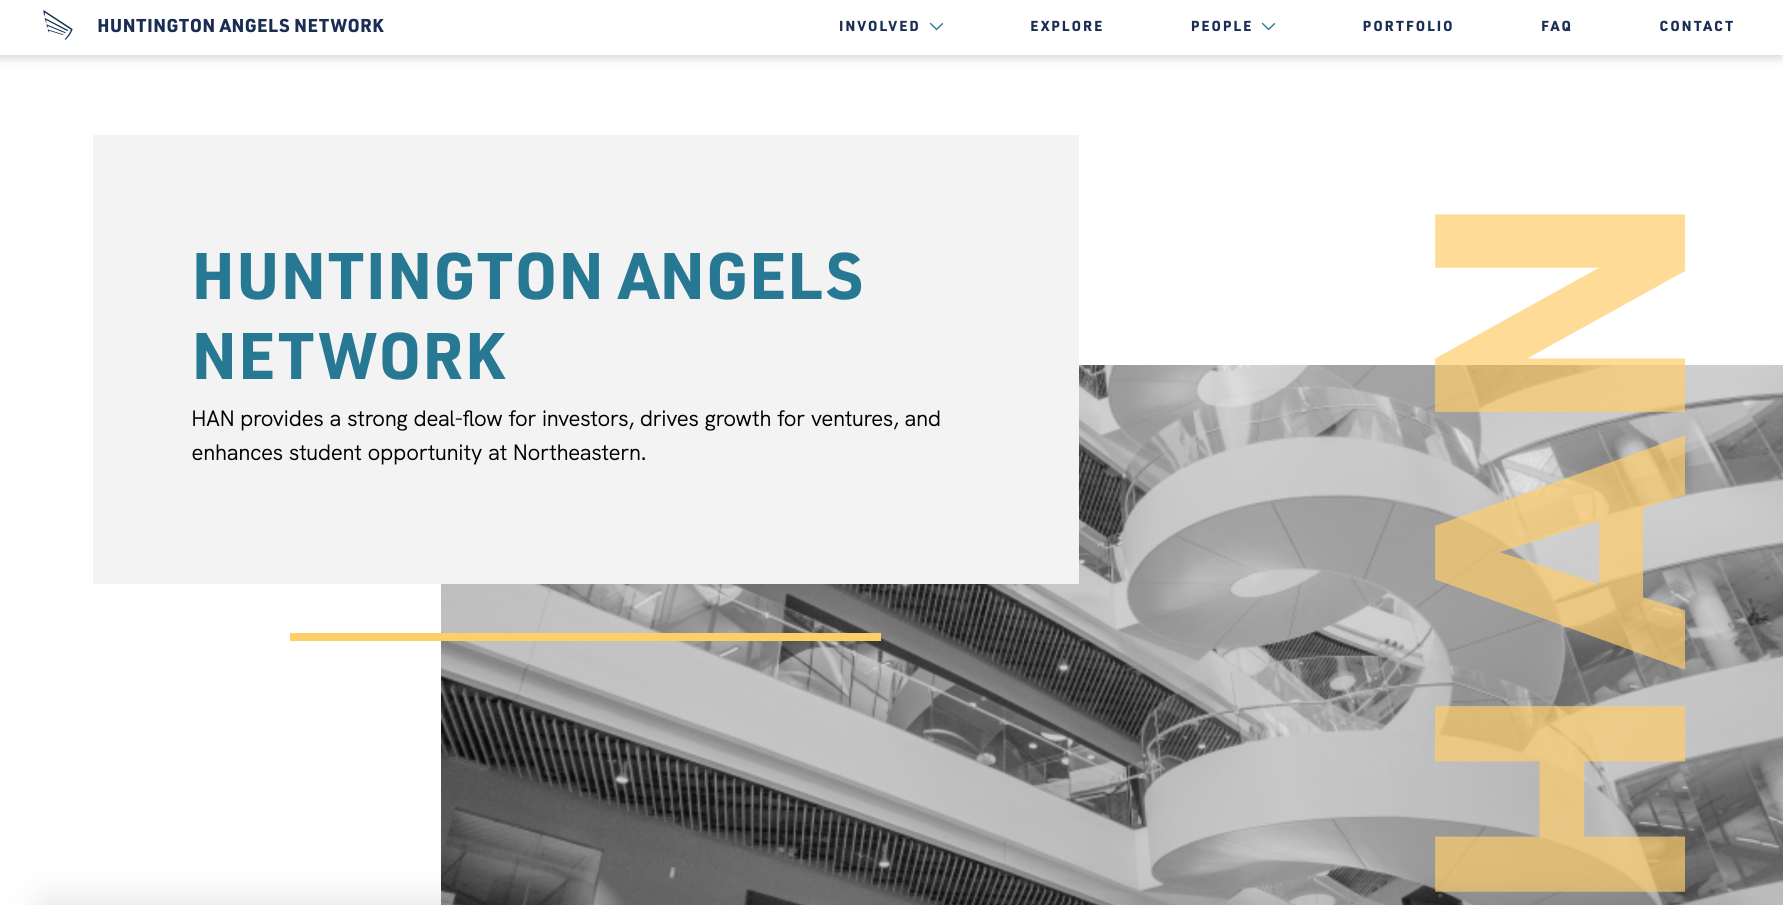 a screenshot of the Huntington Angels Network website, with the organization name in blue letters over a gray block, overlaid on a black and white photo of a spiral staircase. The acronym HAN is overlaid in translucent yellow text over the photo.